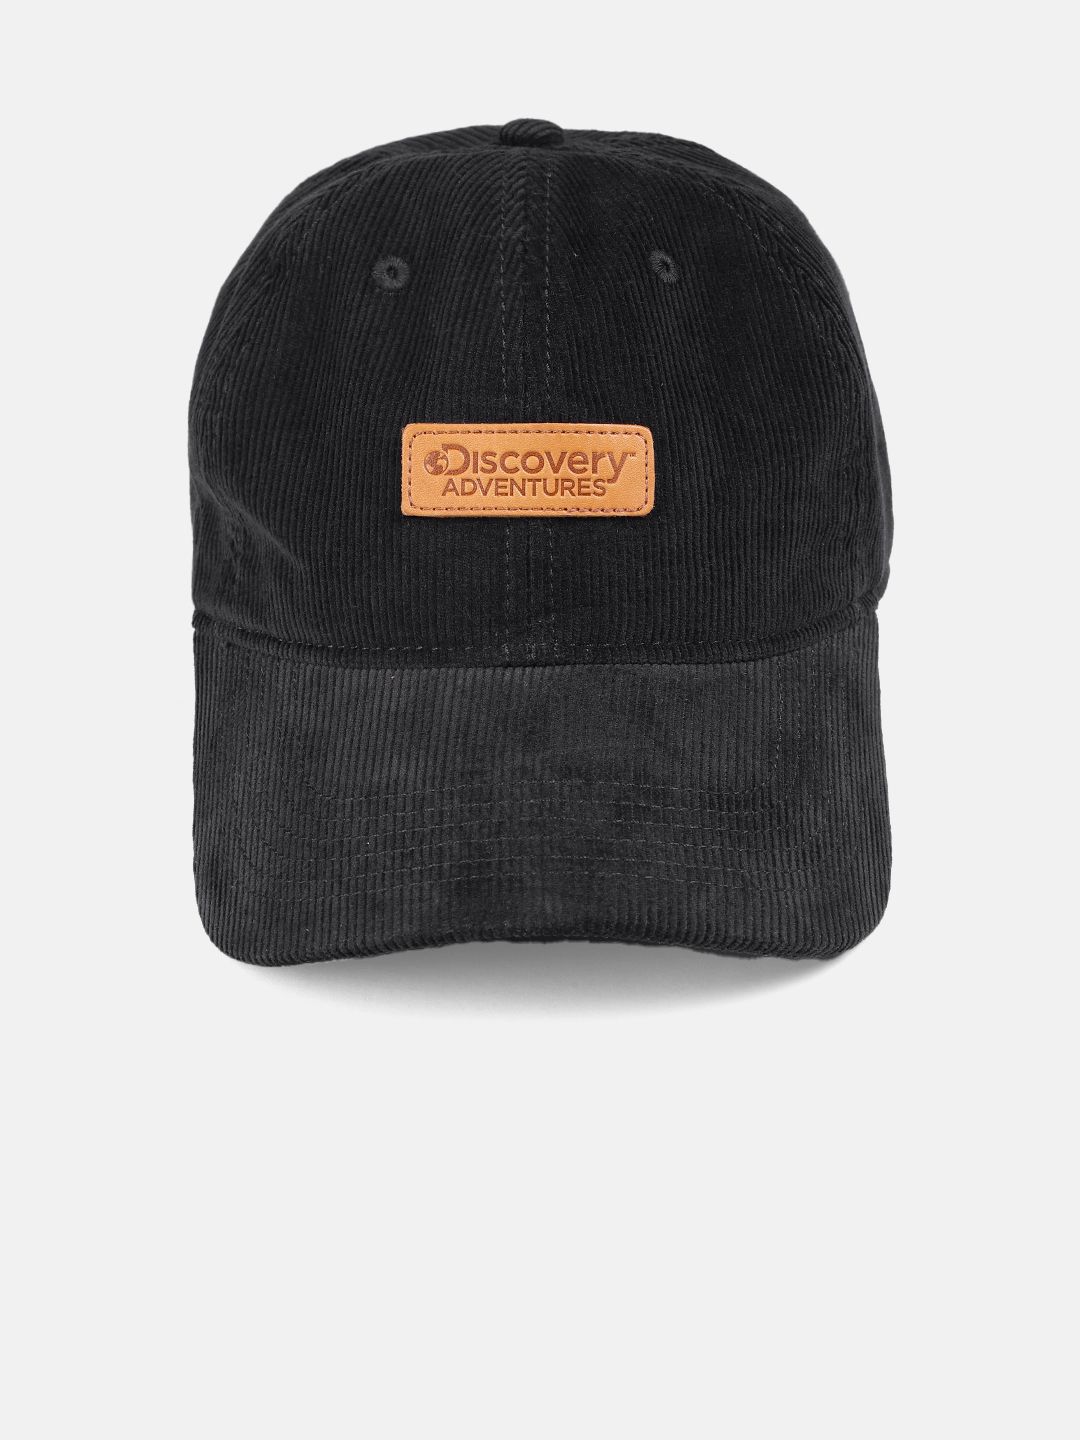 Roadster x Discovery Unisex Black Solid Baseball Cap Price in India